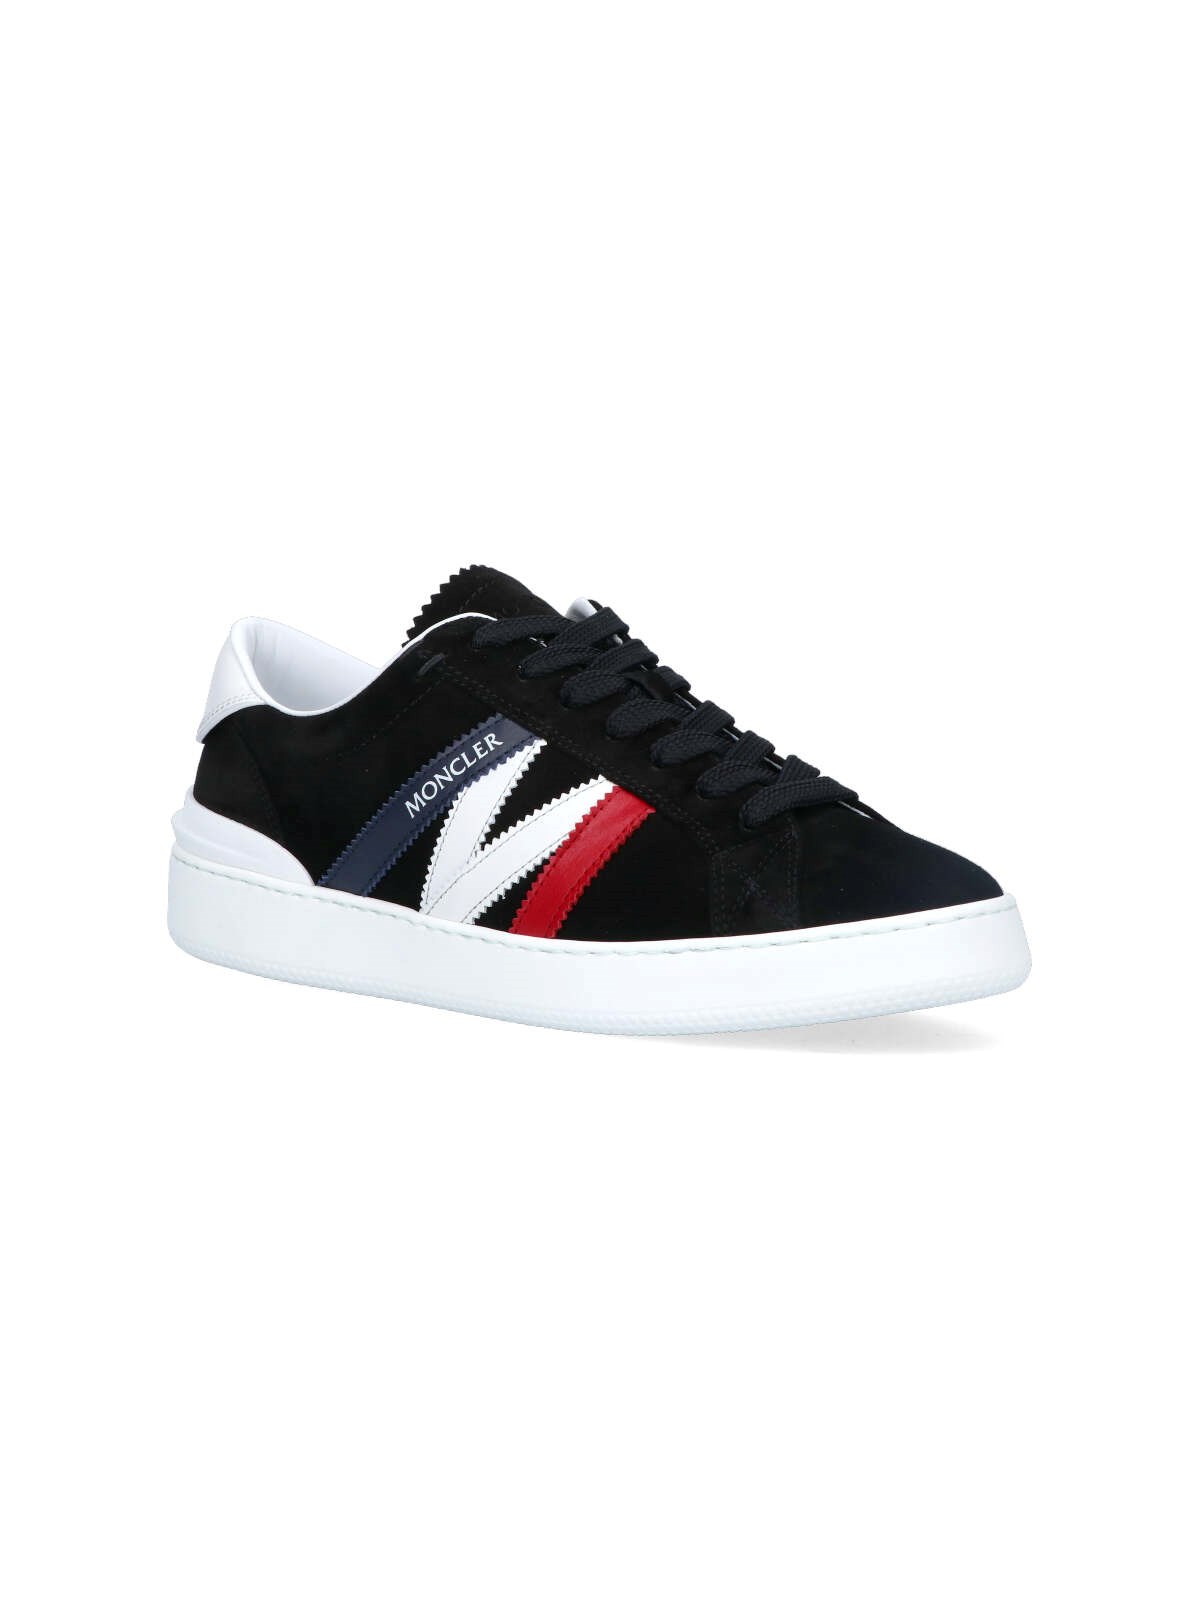 Moncler New Monaco Leather Sneakers In White | ModeSens | Leather sneakers,  Moncler, White sneaker